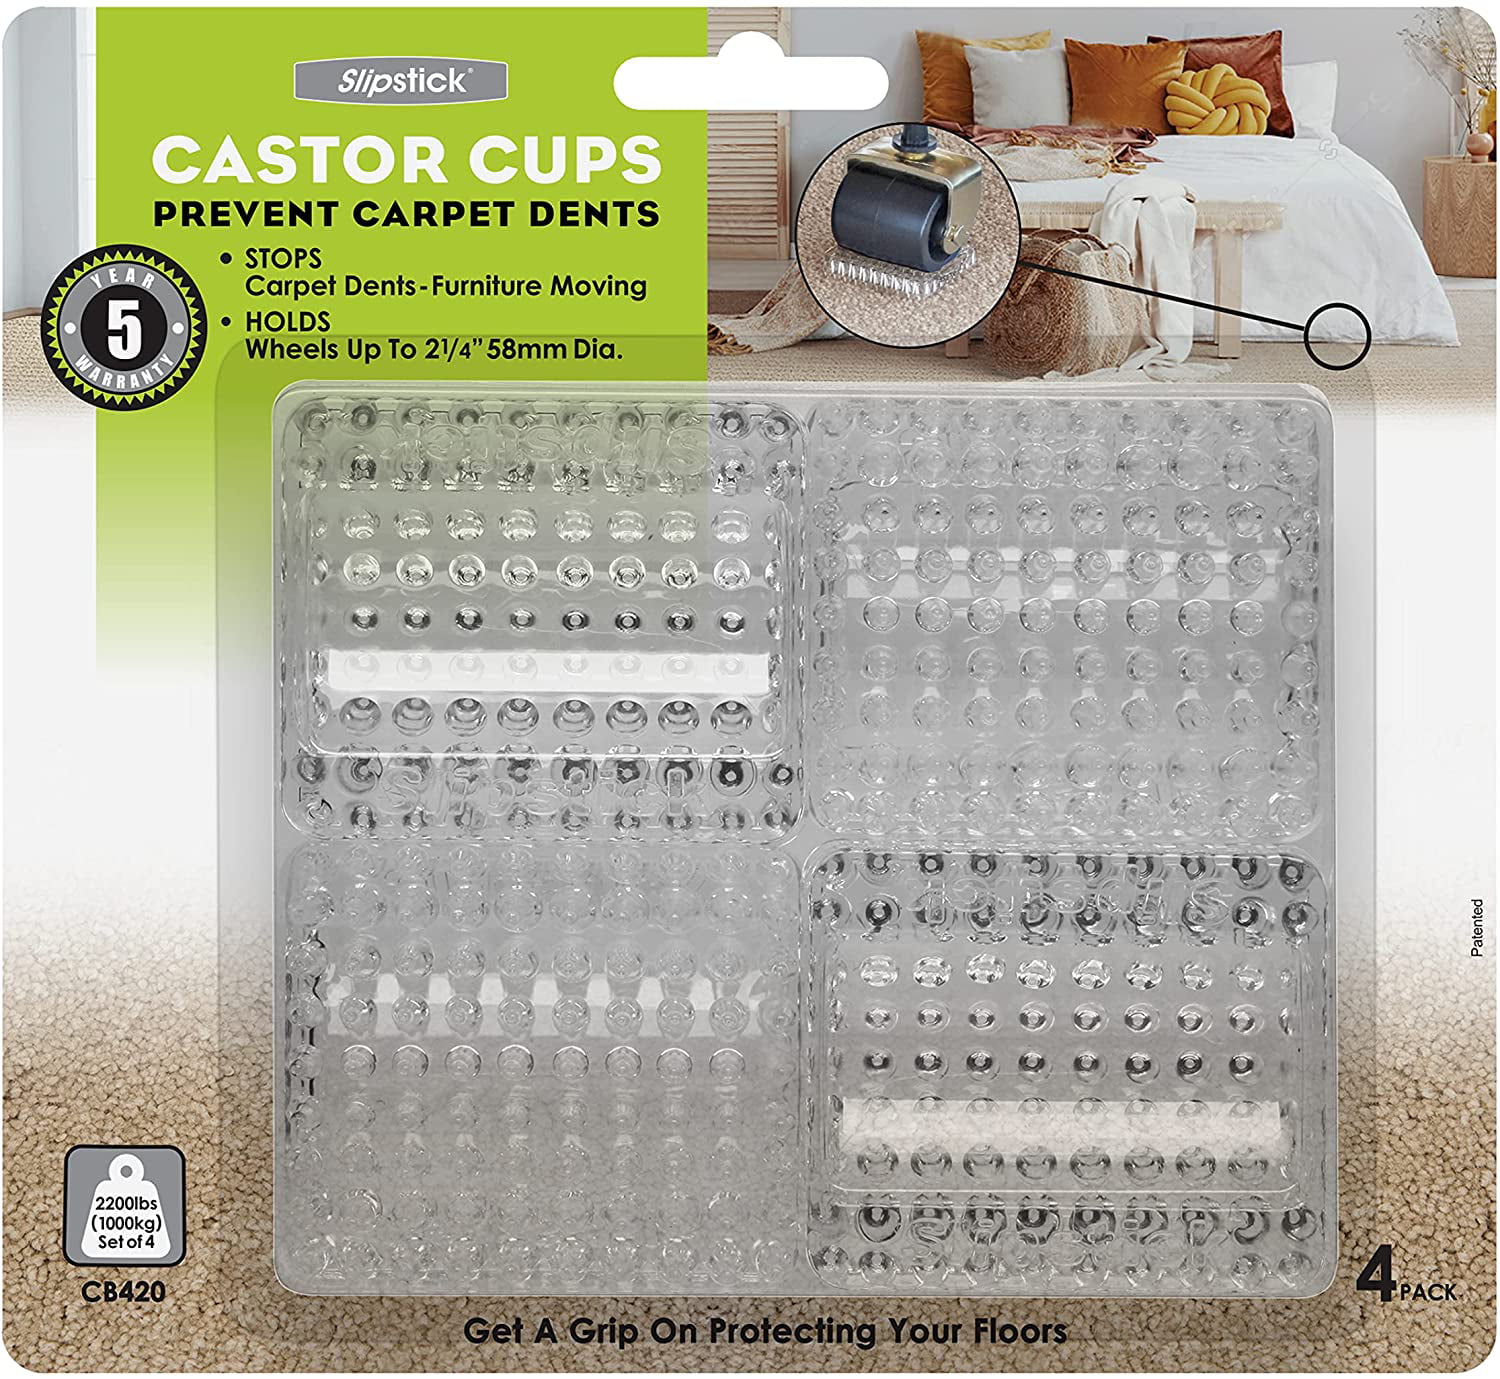 Protects Floors BROWN Carpet Base TIC SQUARE CASTOR CUPS 48mm 8 Pieces 